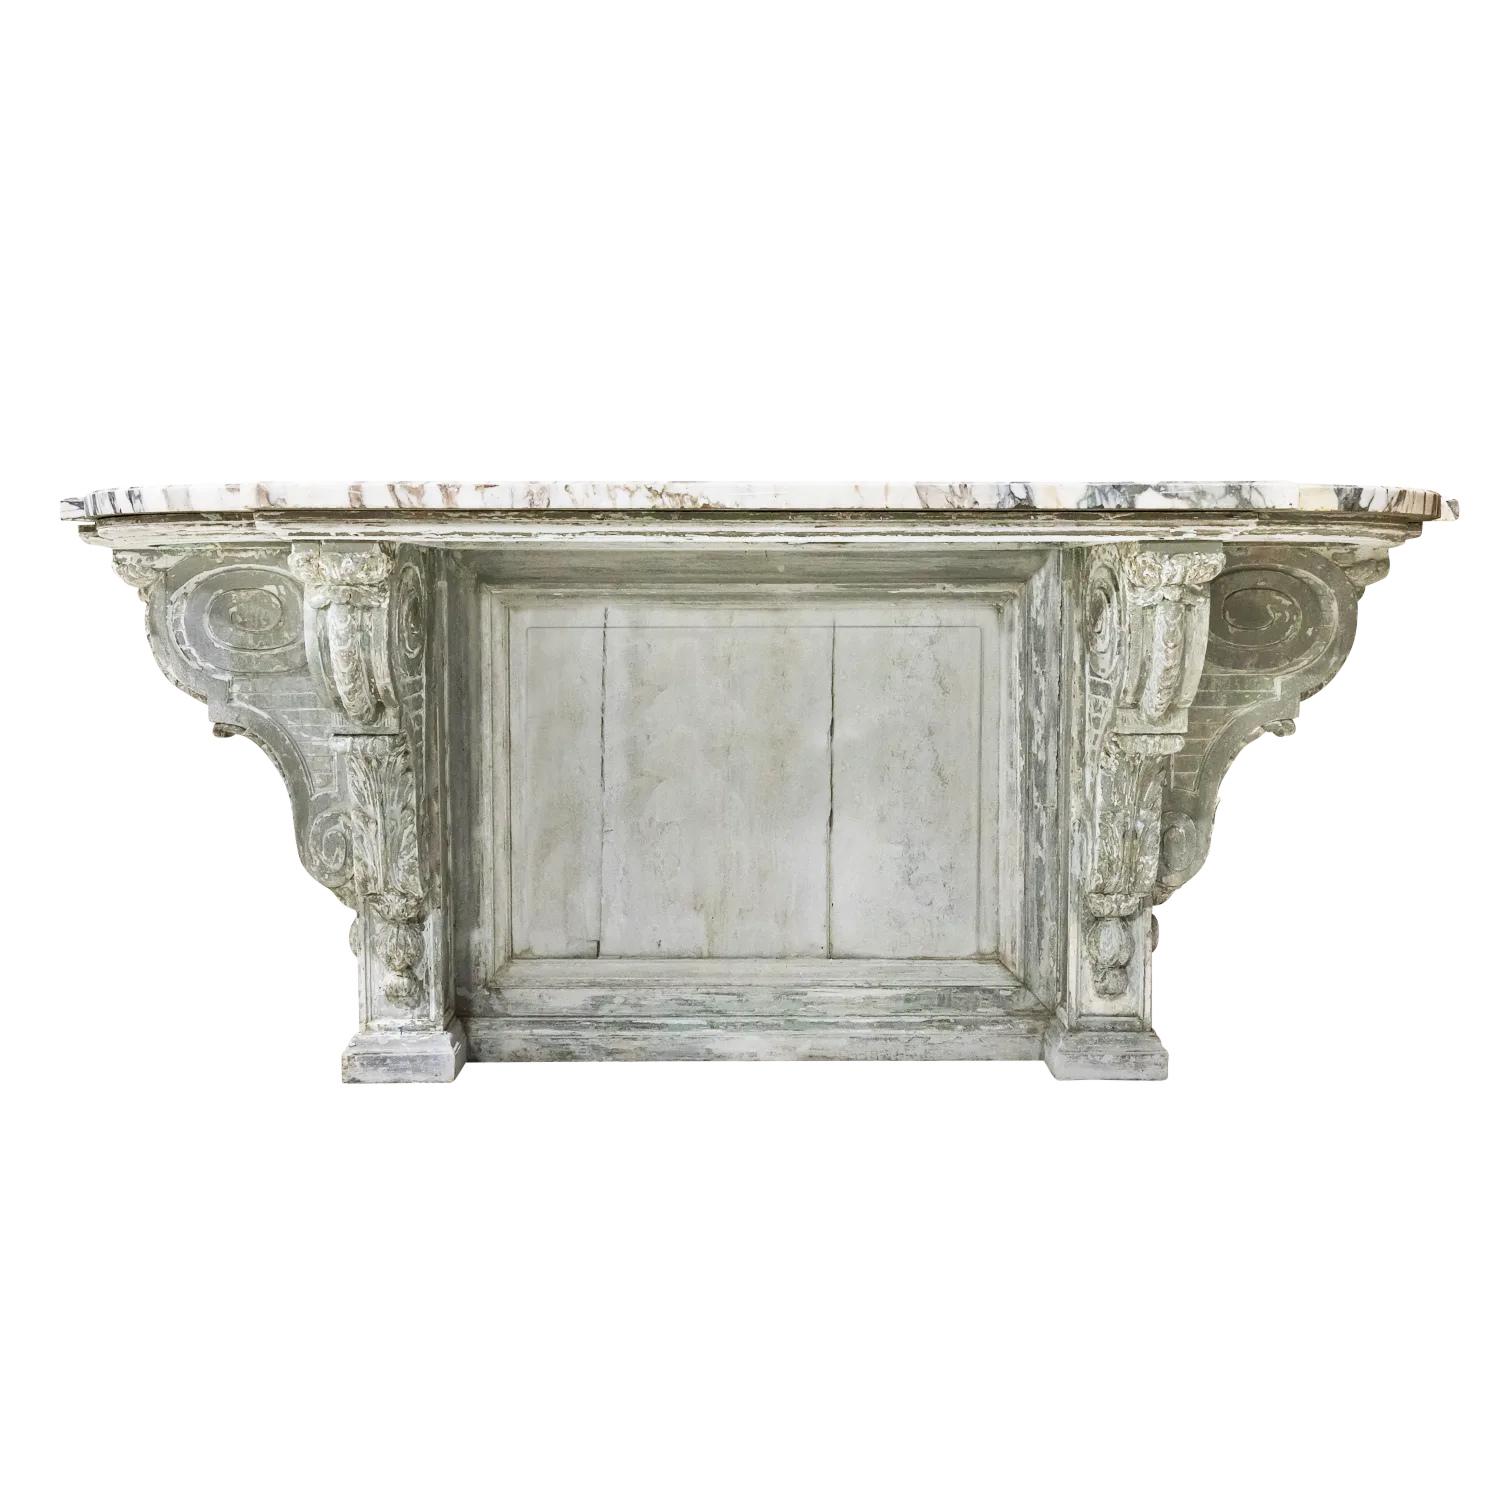 A very fine 19th century French Regence style painted console handcrafted in Provence near Arles, circa 1880s. Featuring the original beveled and shaped Calacatta marble top that is contoured to follow the intricacies of the base below, it provides